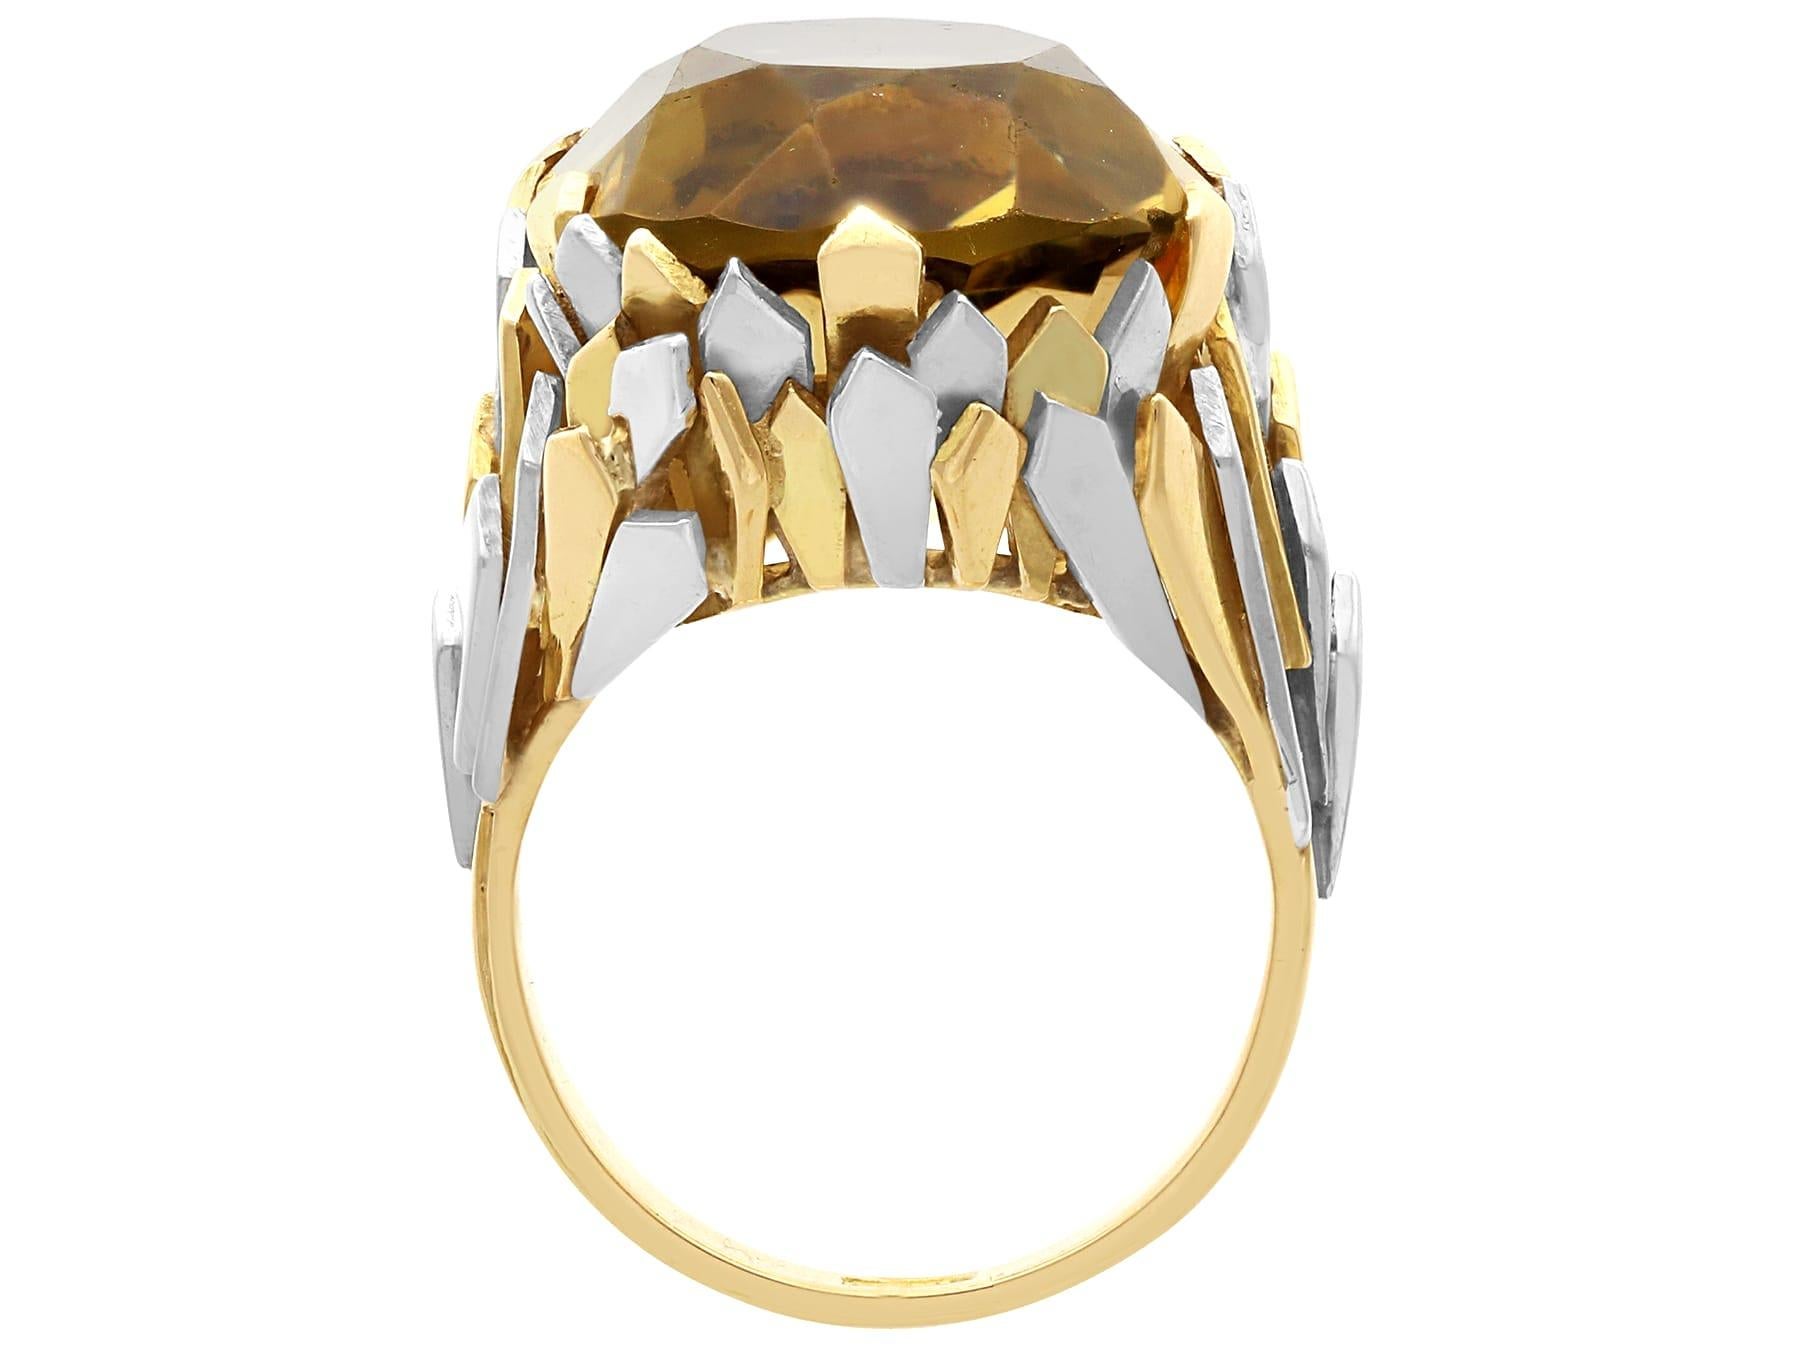 Women's or Men's Vintage 19.05Ct Smoky Quartz and 18k Yellow Gold Cocktail Ring Circa 1970 For Sale